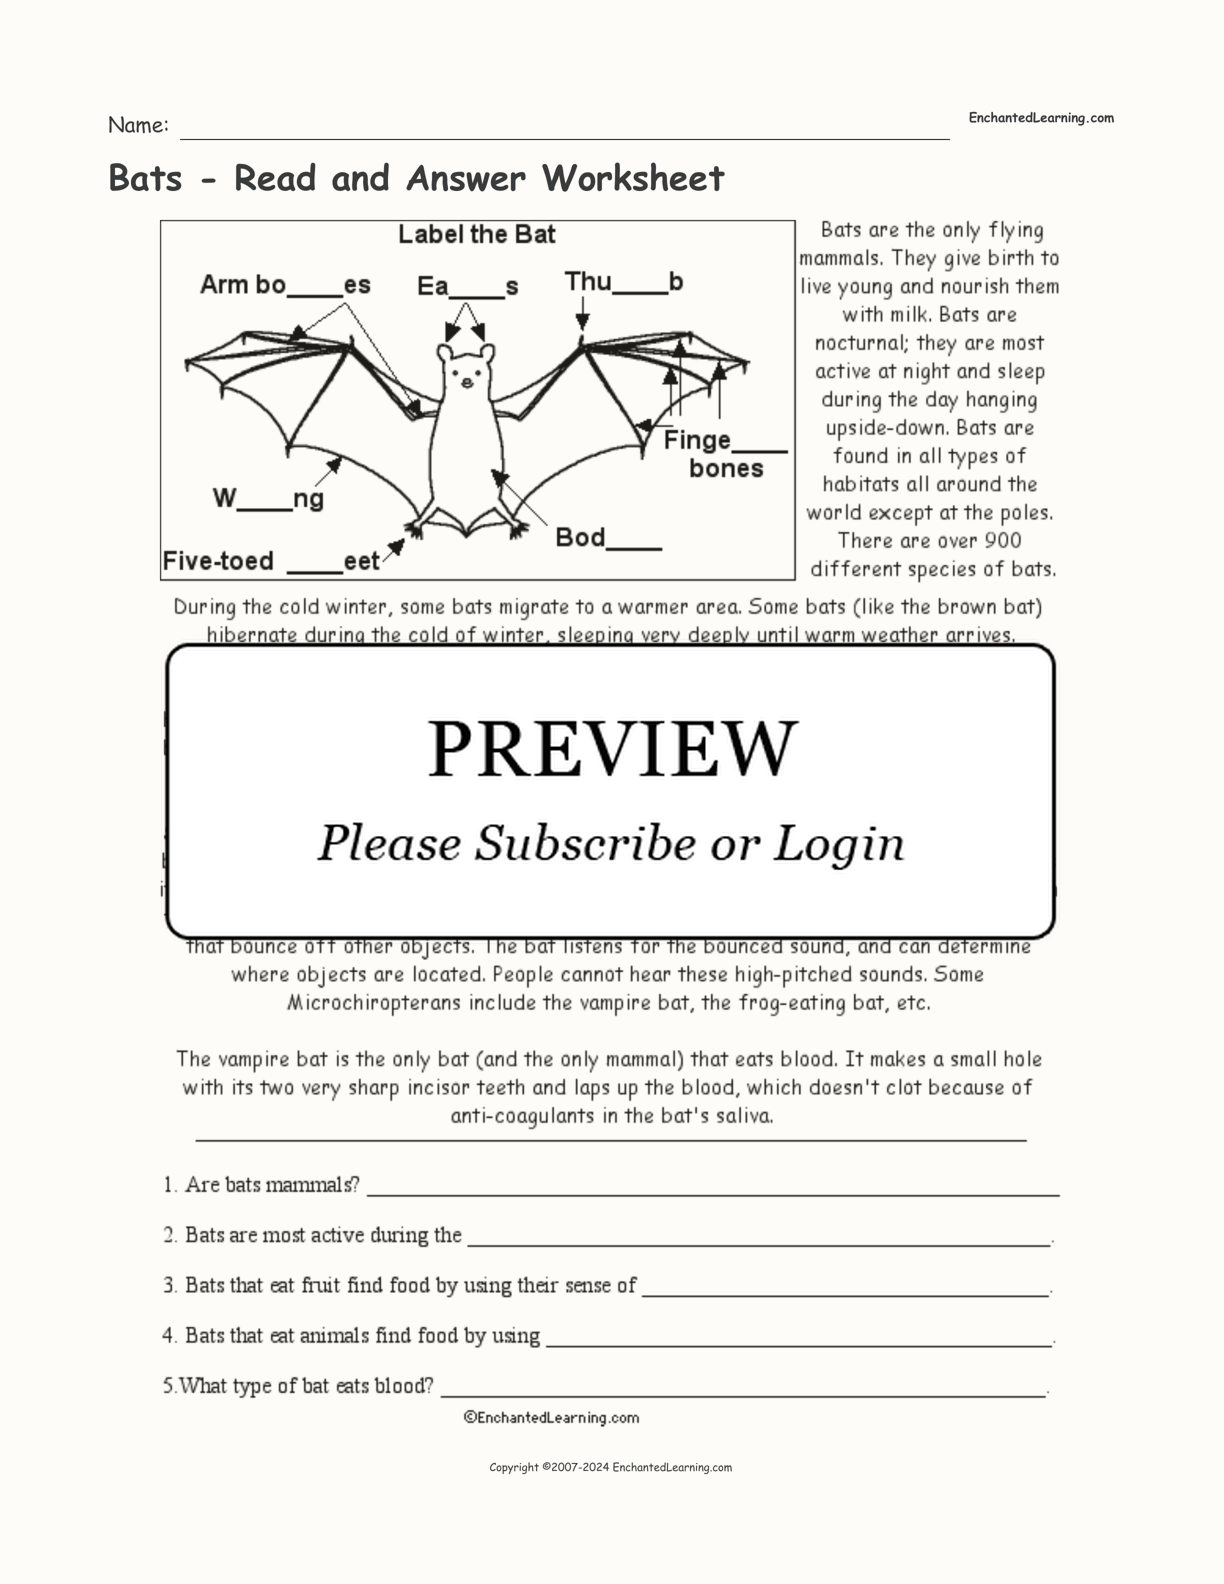 Bats - Read and Answer Worksheet interactive worksheet page 1